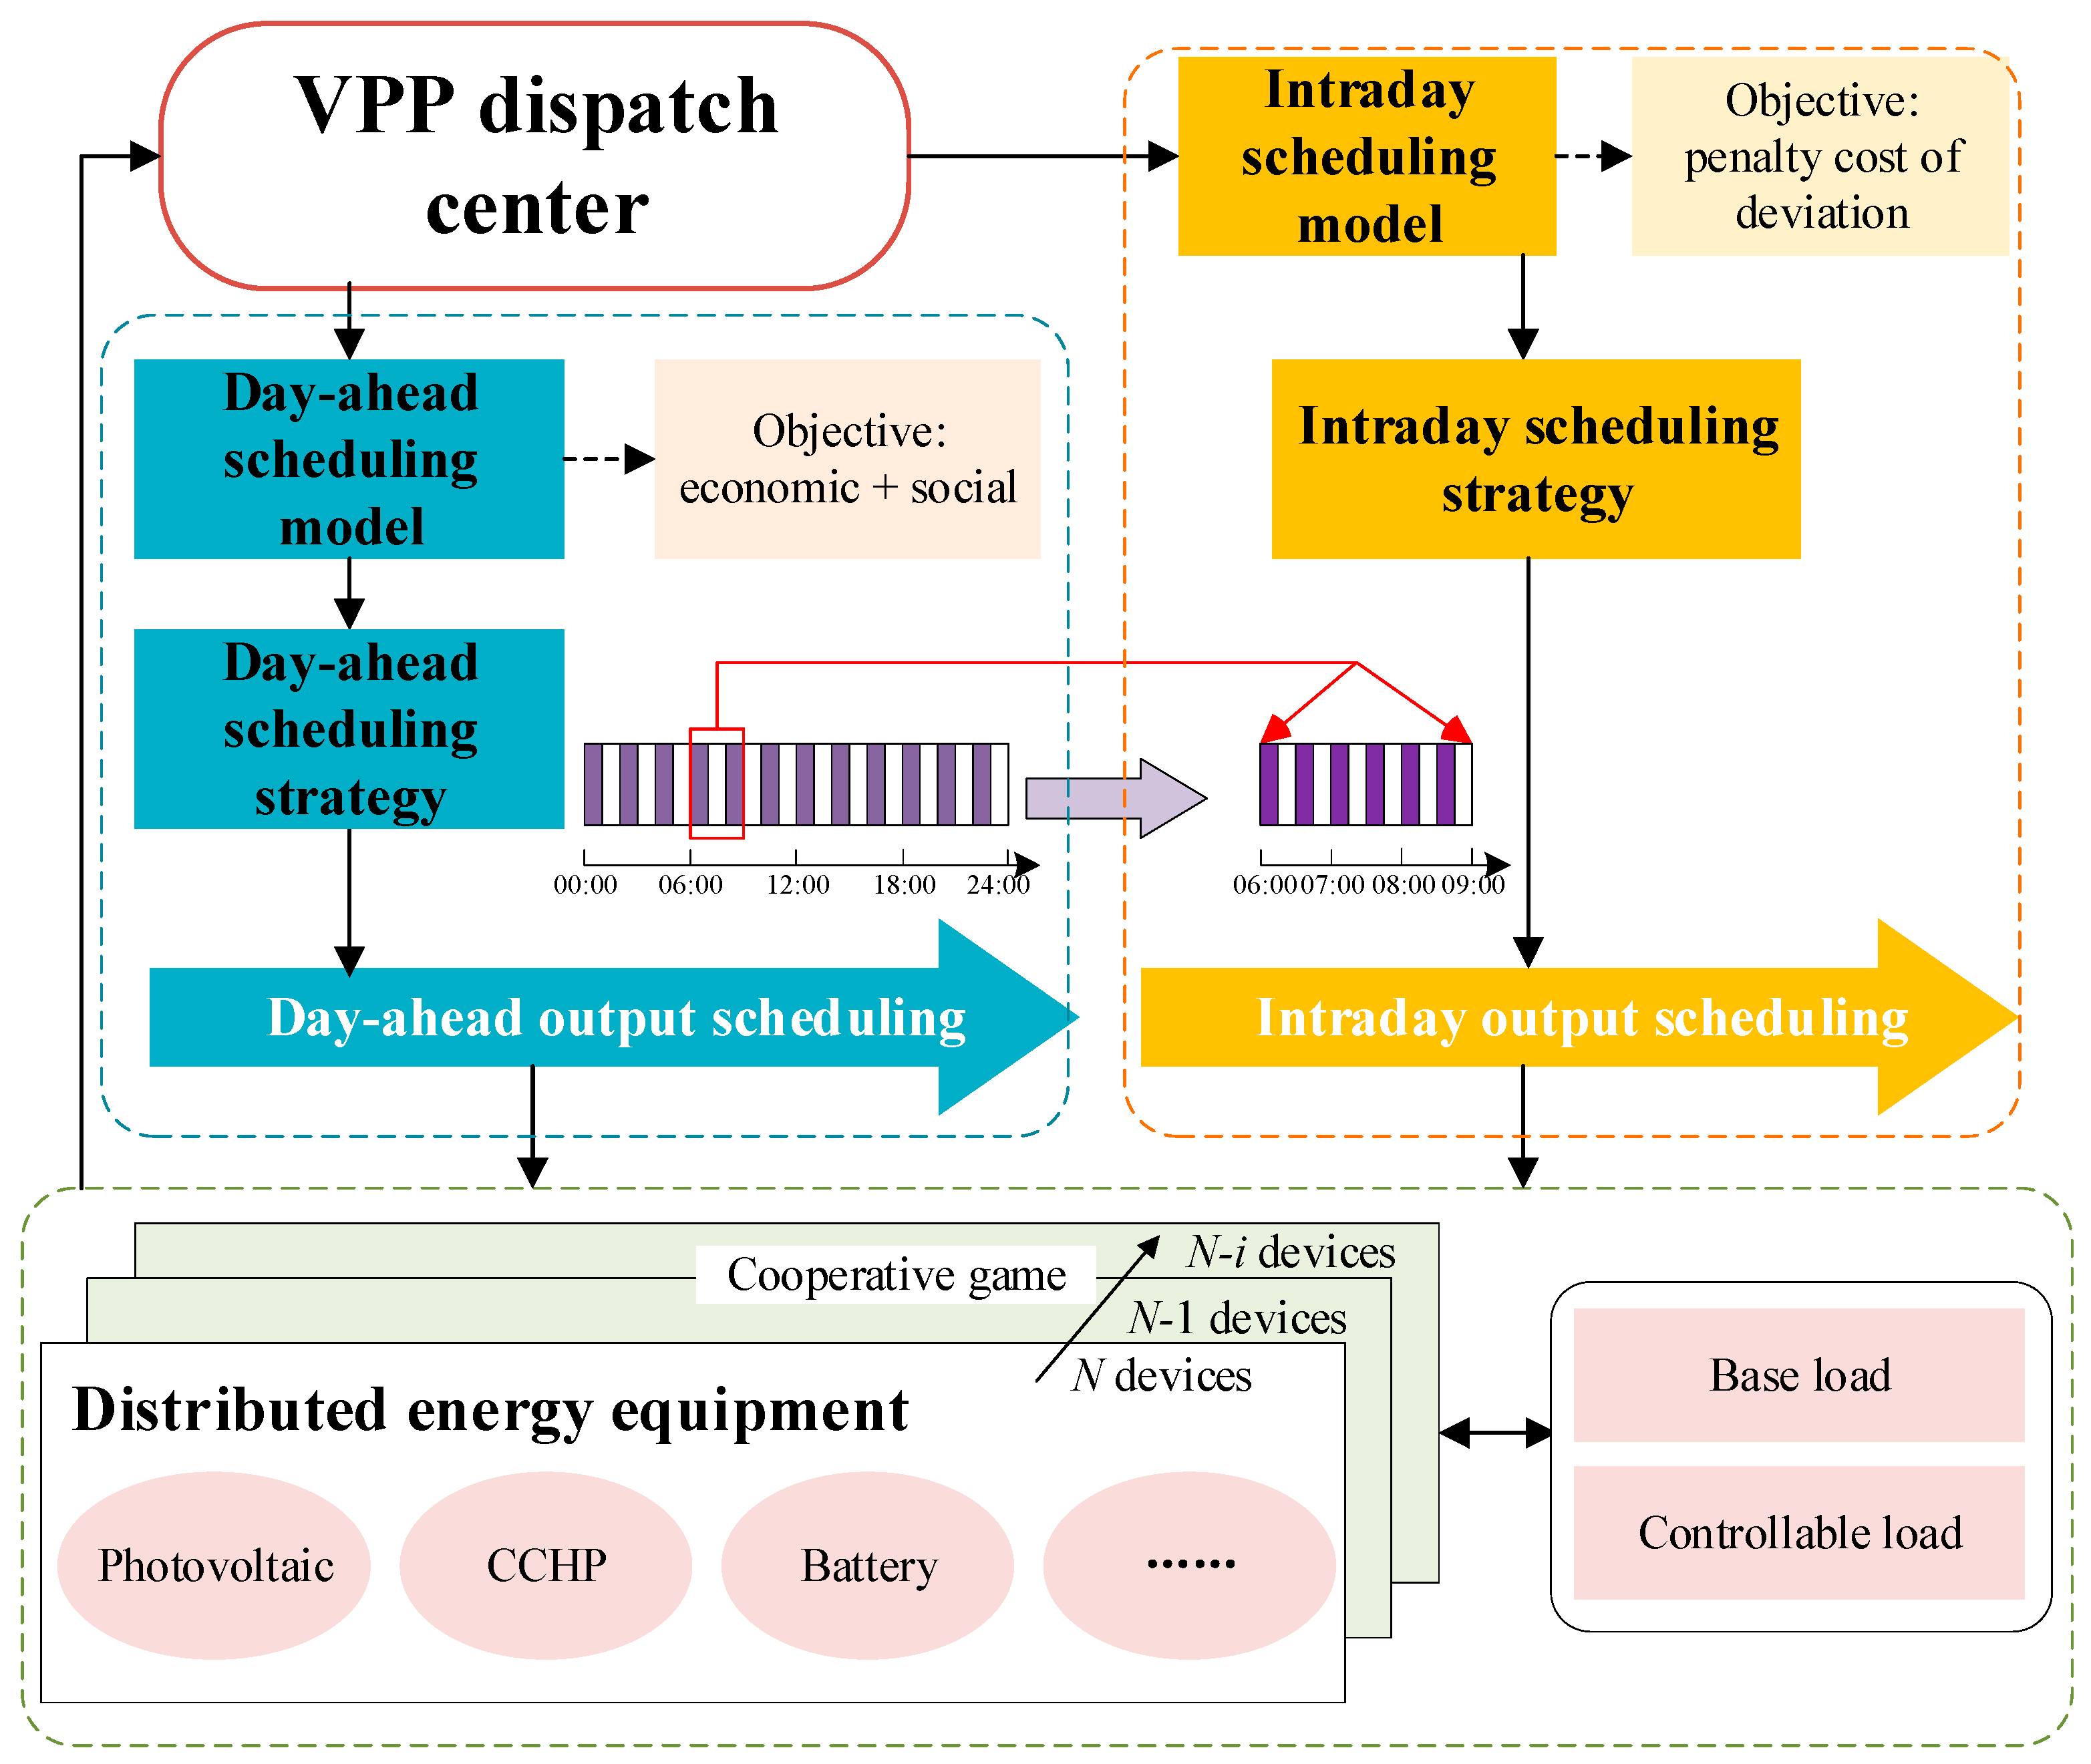 Target ancillary services for the VPP project were scheduling